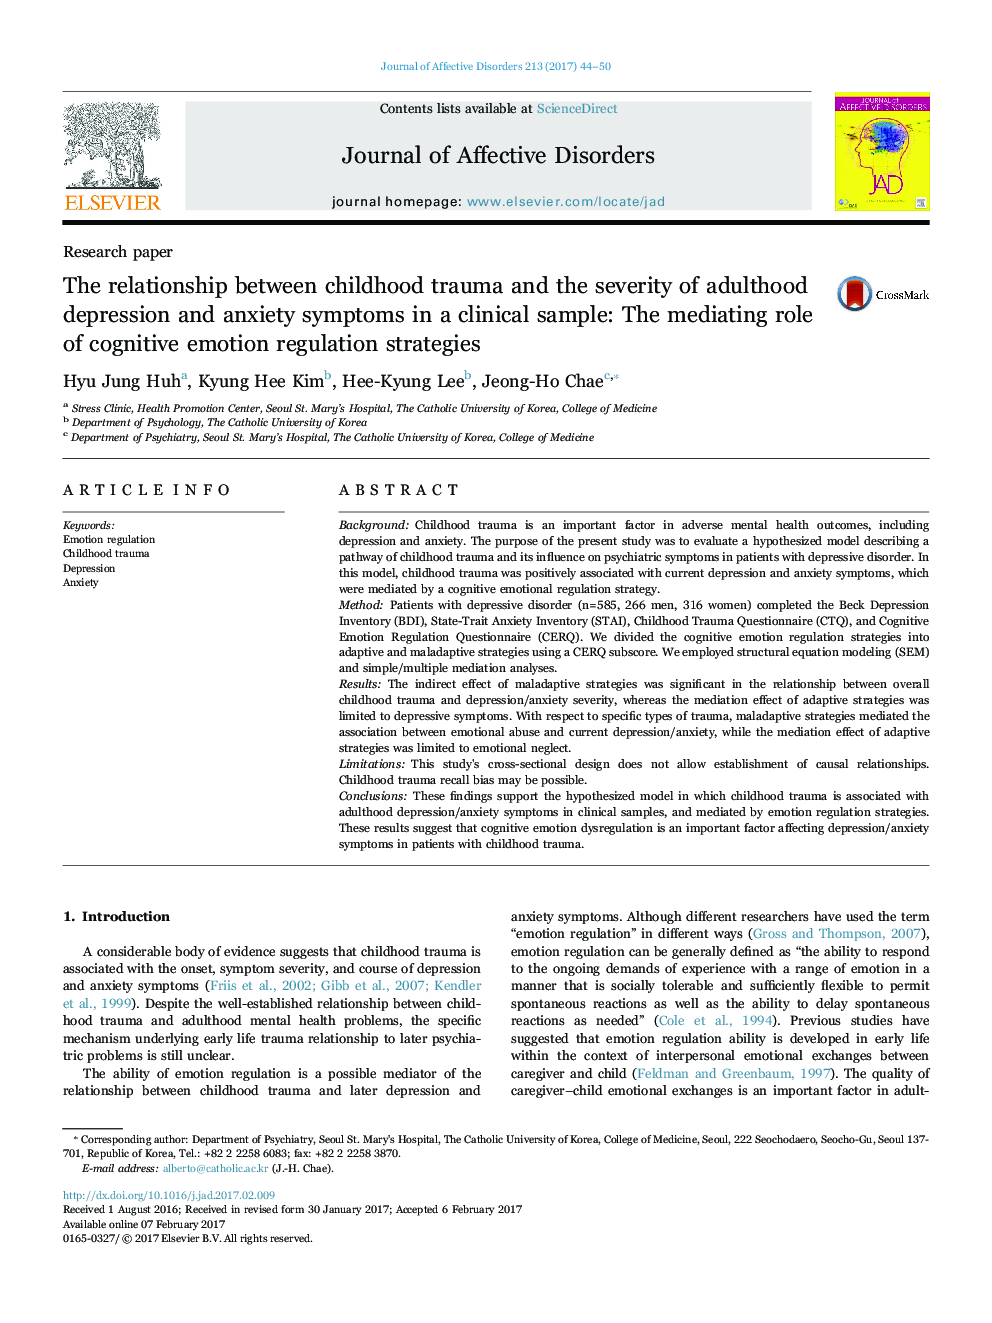 Research paperThe relationship between childhood trauma and the severity of adulthood depression and anxiety symptoms in a clinical sample: The mediating role of cognitive emotion regulation strategies